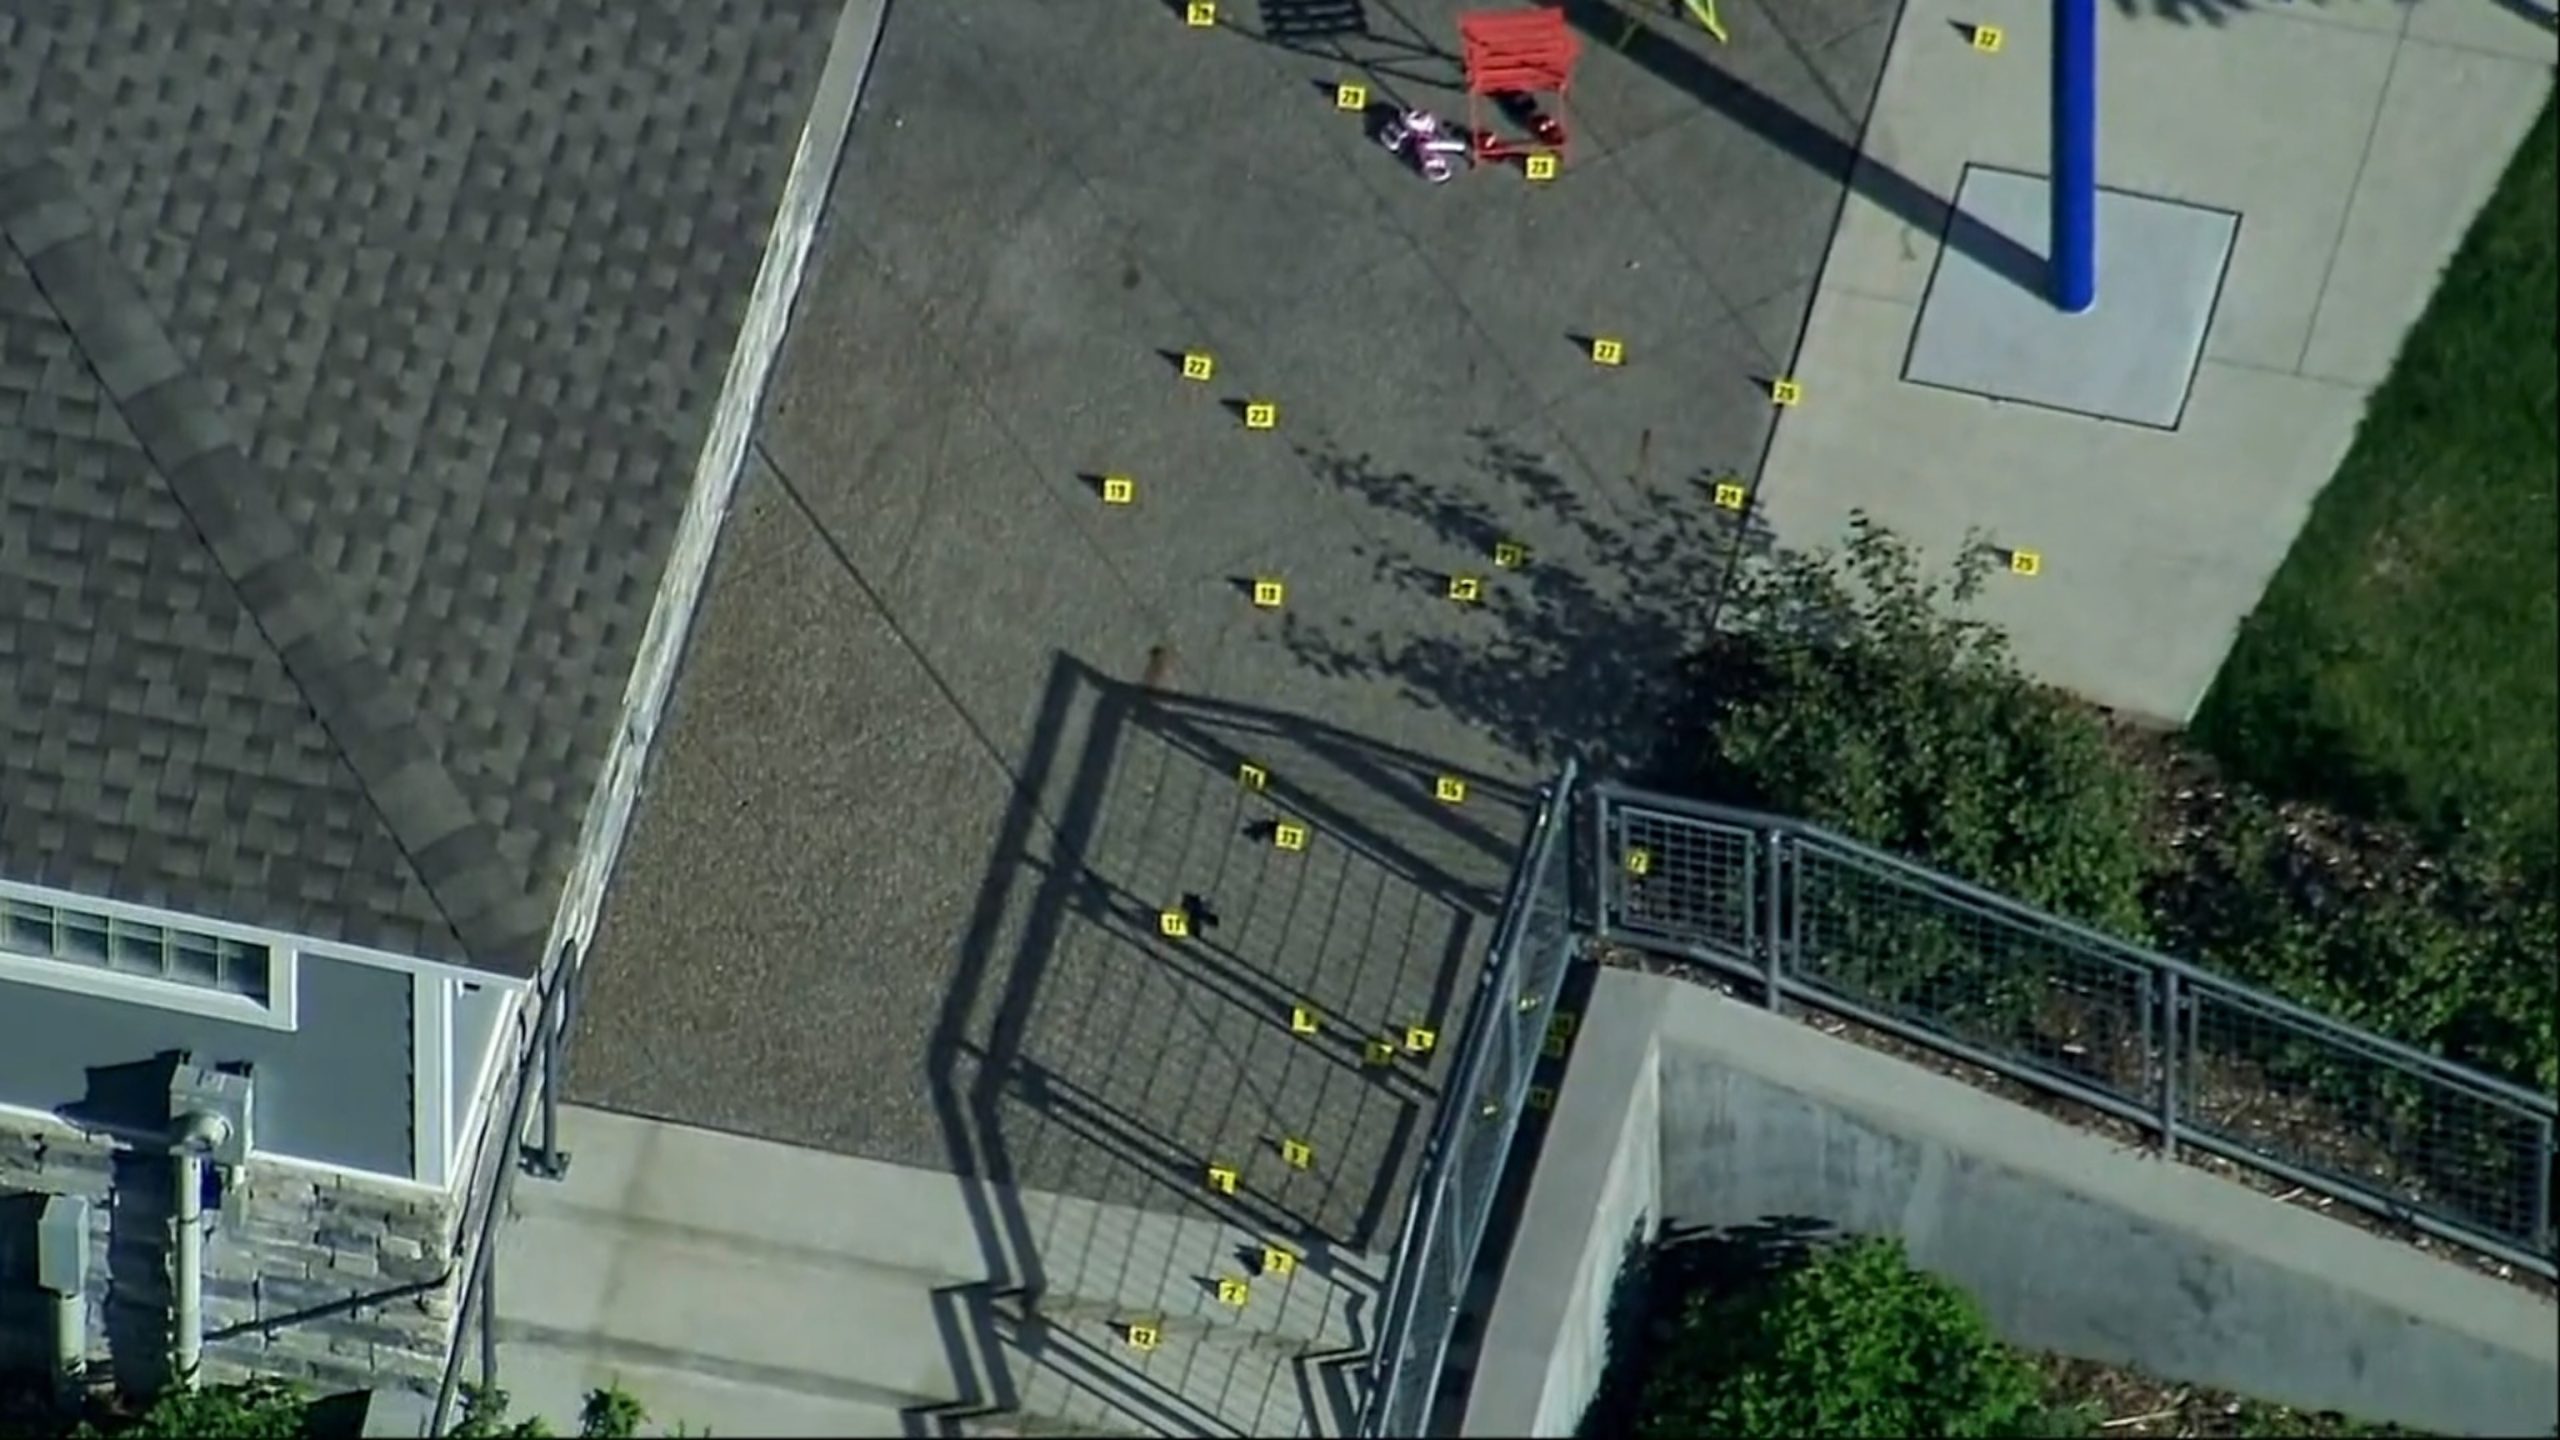 Police contain suspect after multiple people shot at Michigan splash pad park